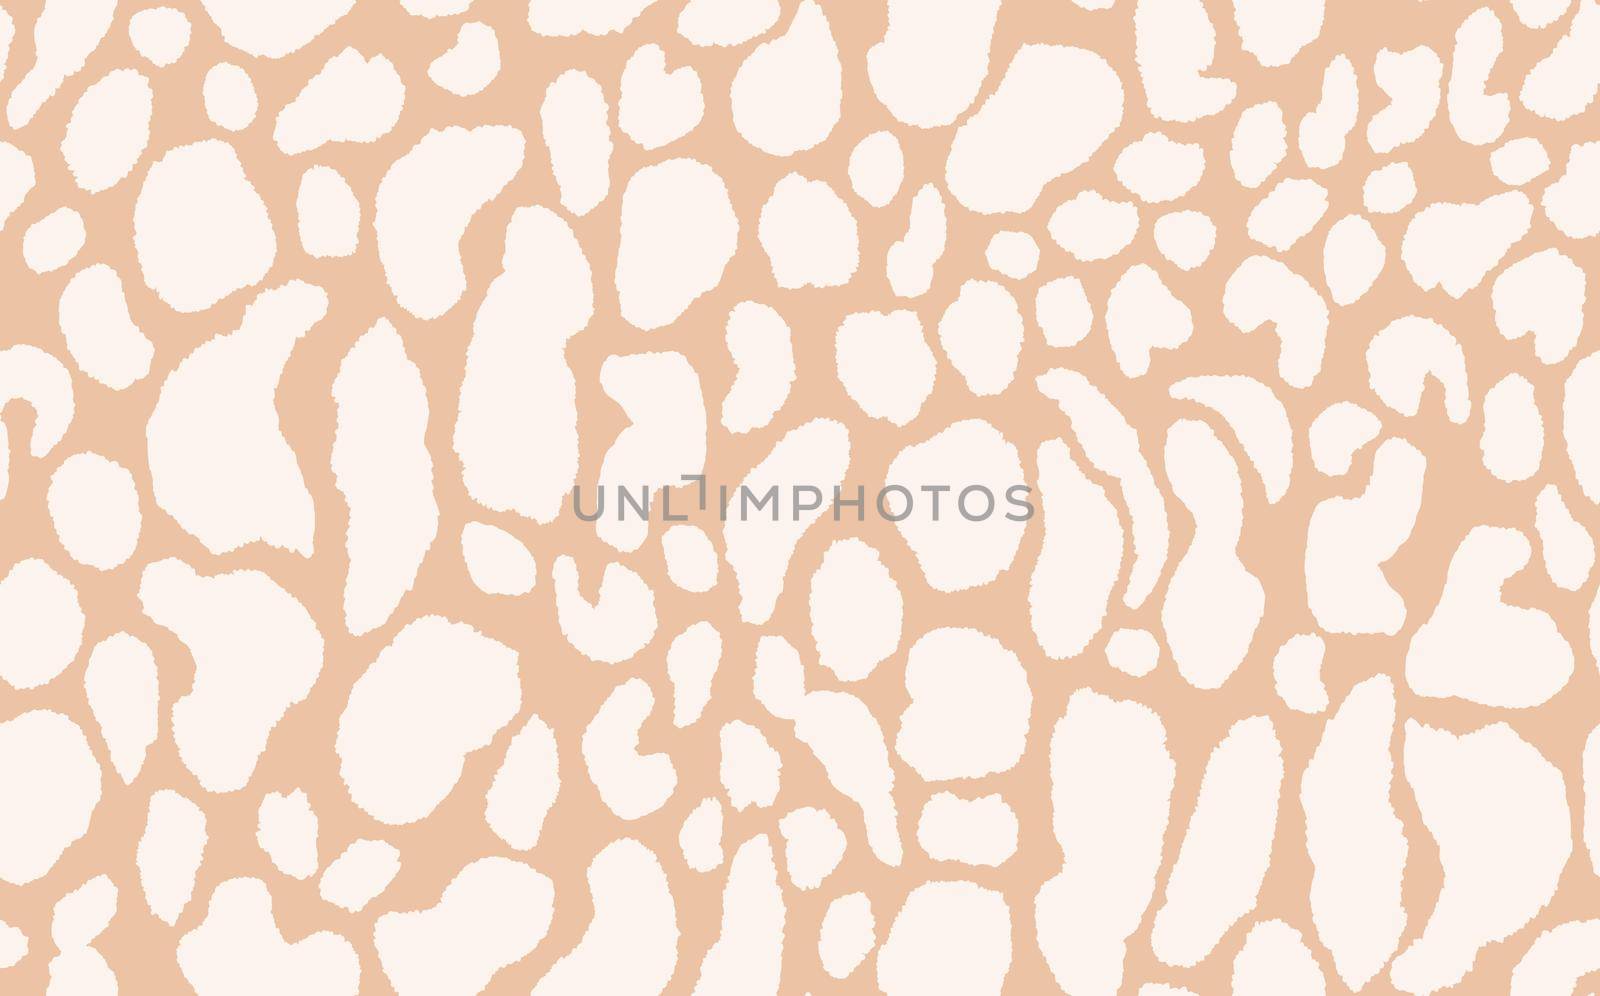 Abstract modern leopard seamless pattern. Animals trendy background. Beige decorative vector stock illustration for print, card, postcard, fabric, textile. Modern ornament of stylized skin.